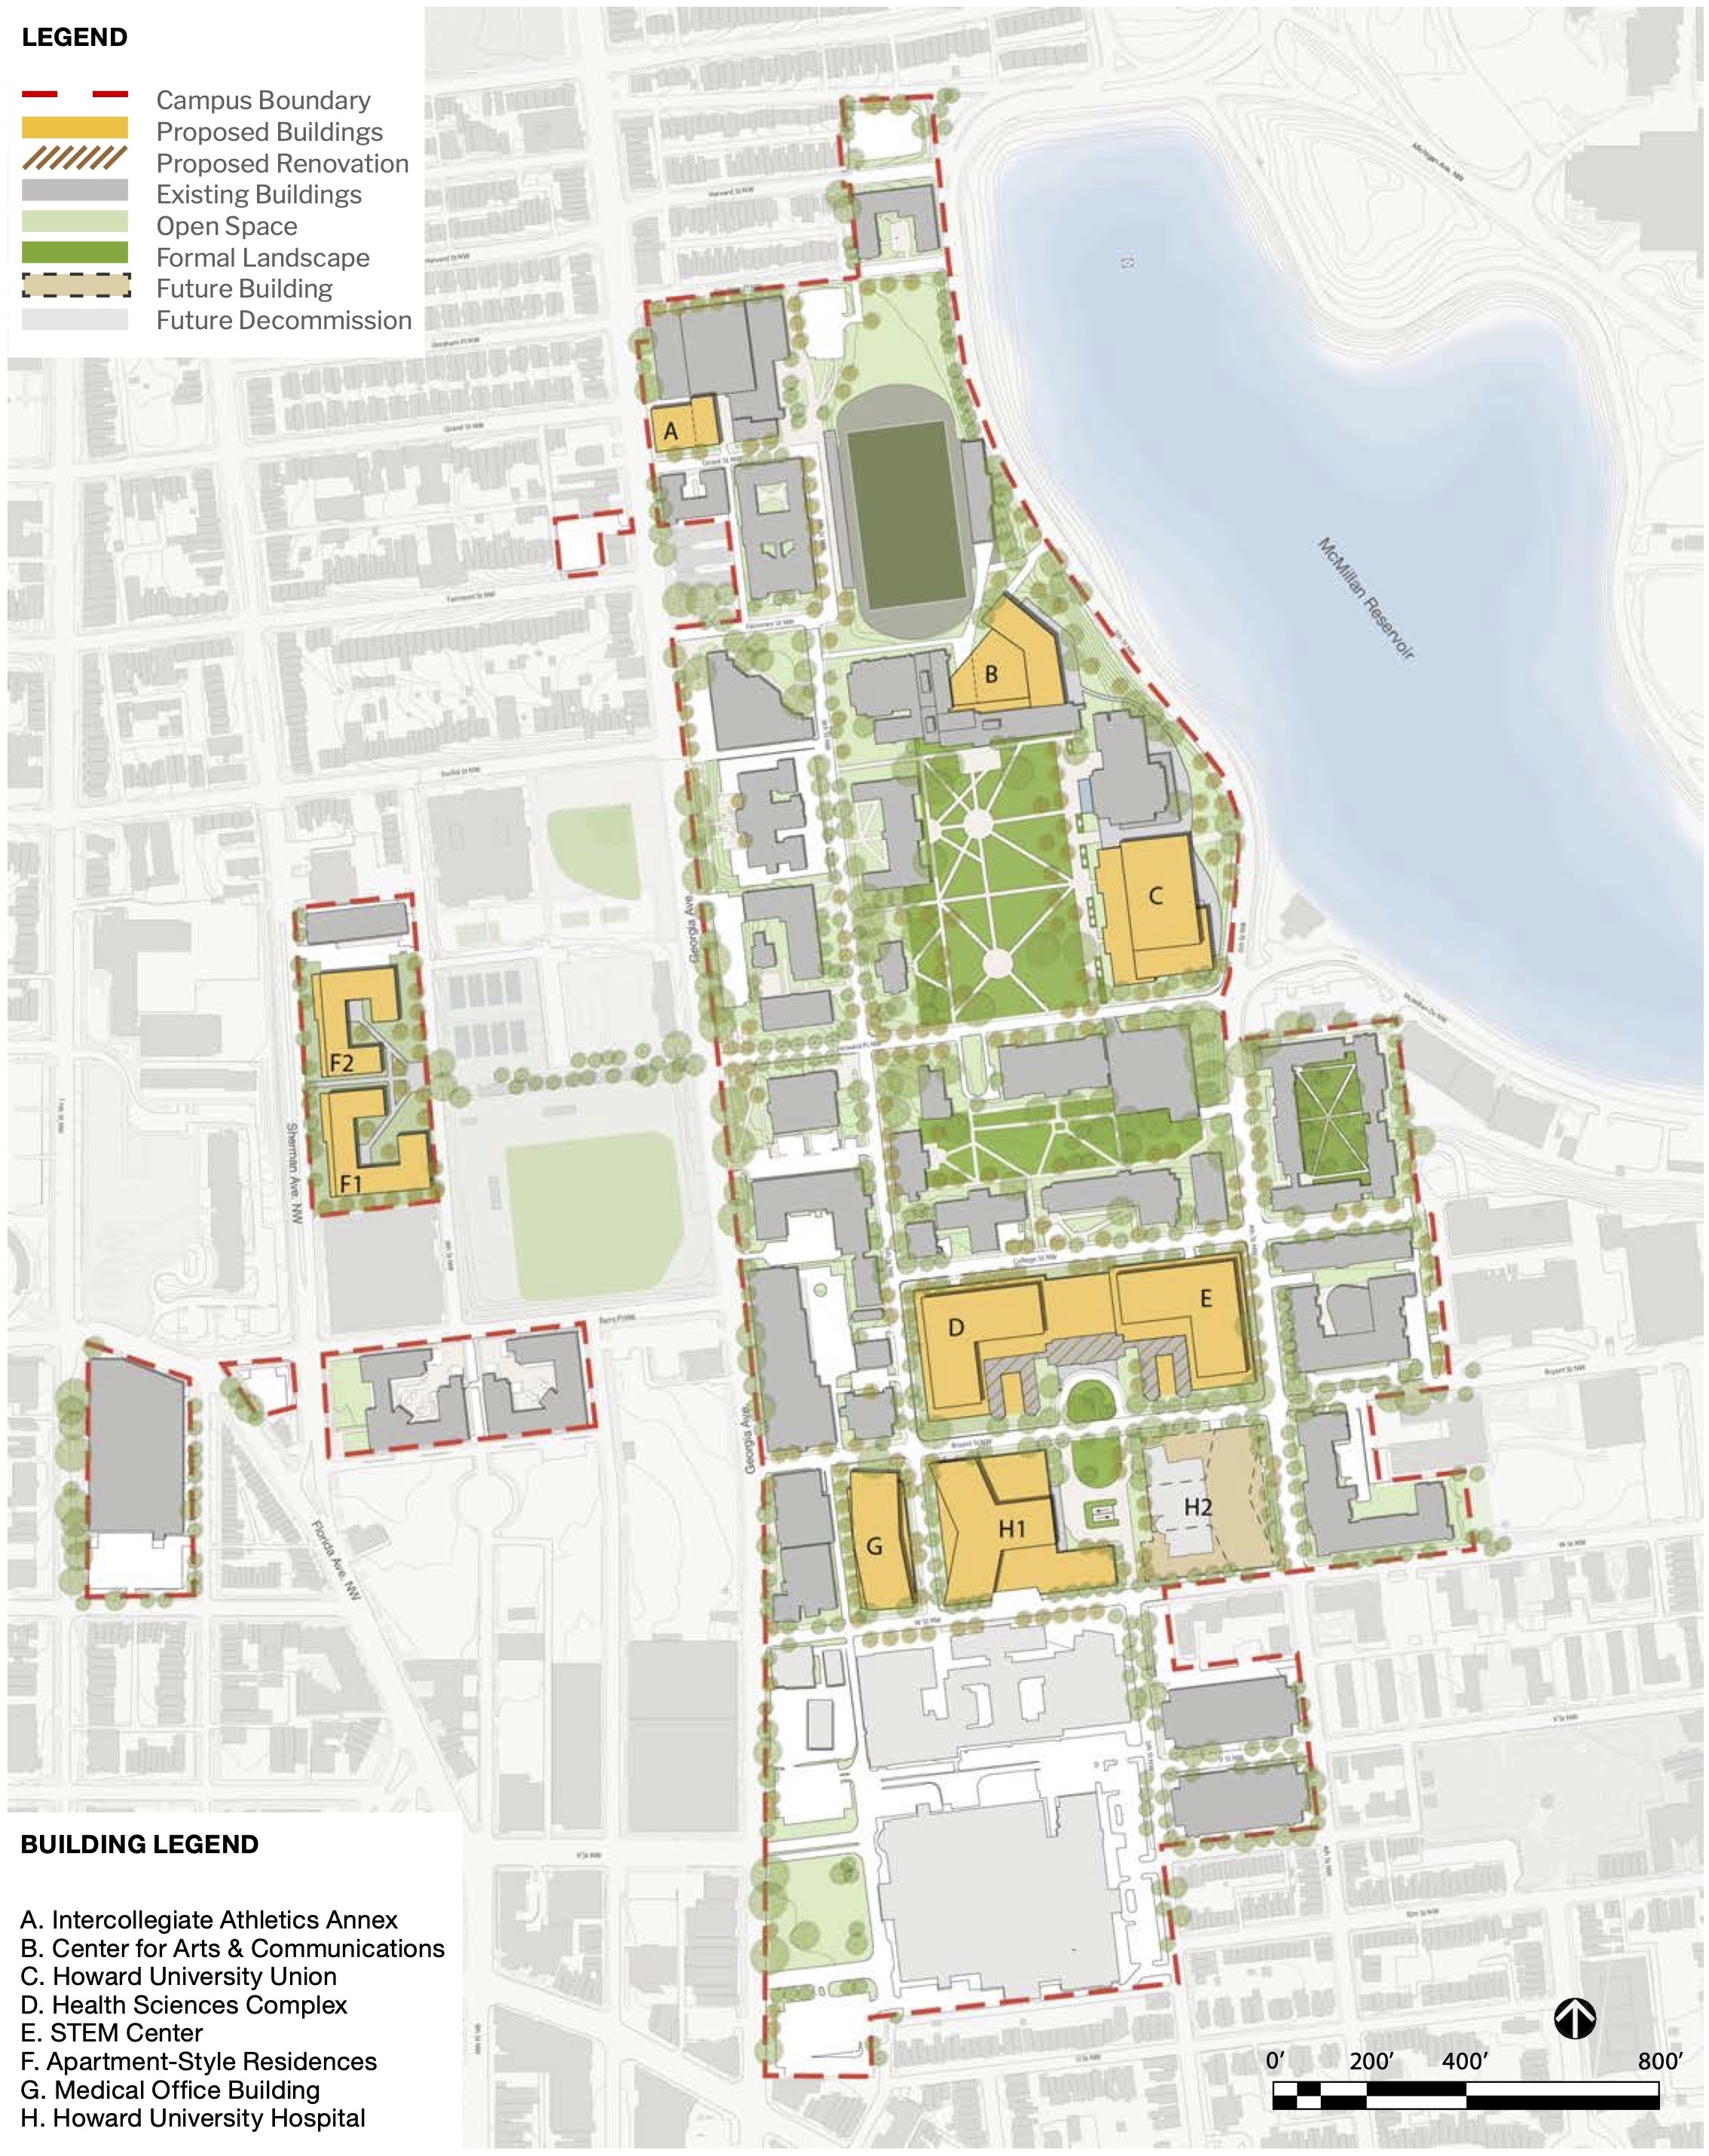 A master plan showing the howard university campus